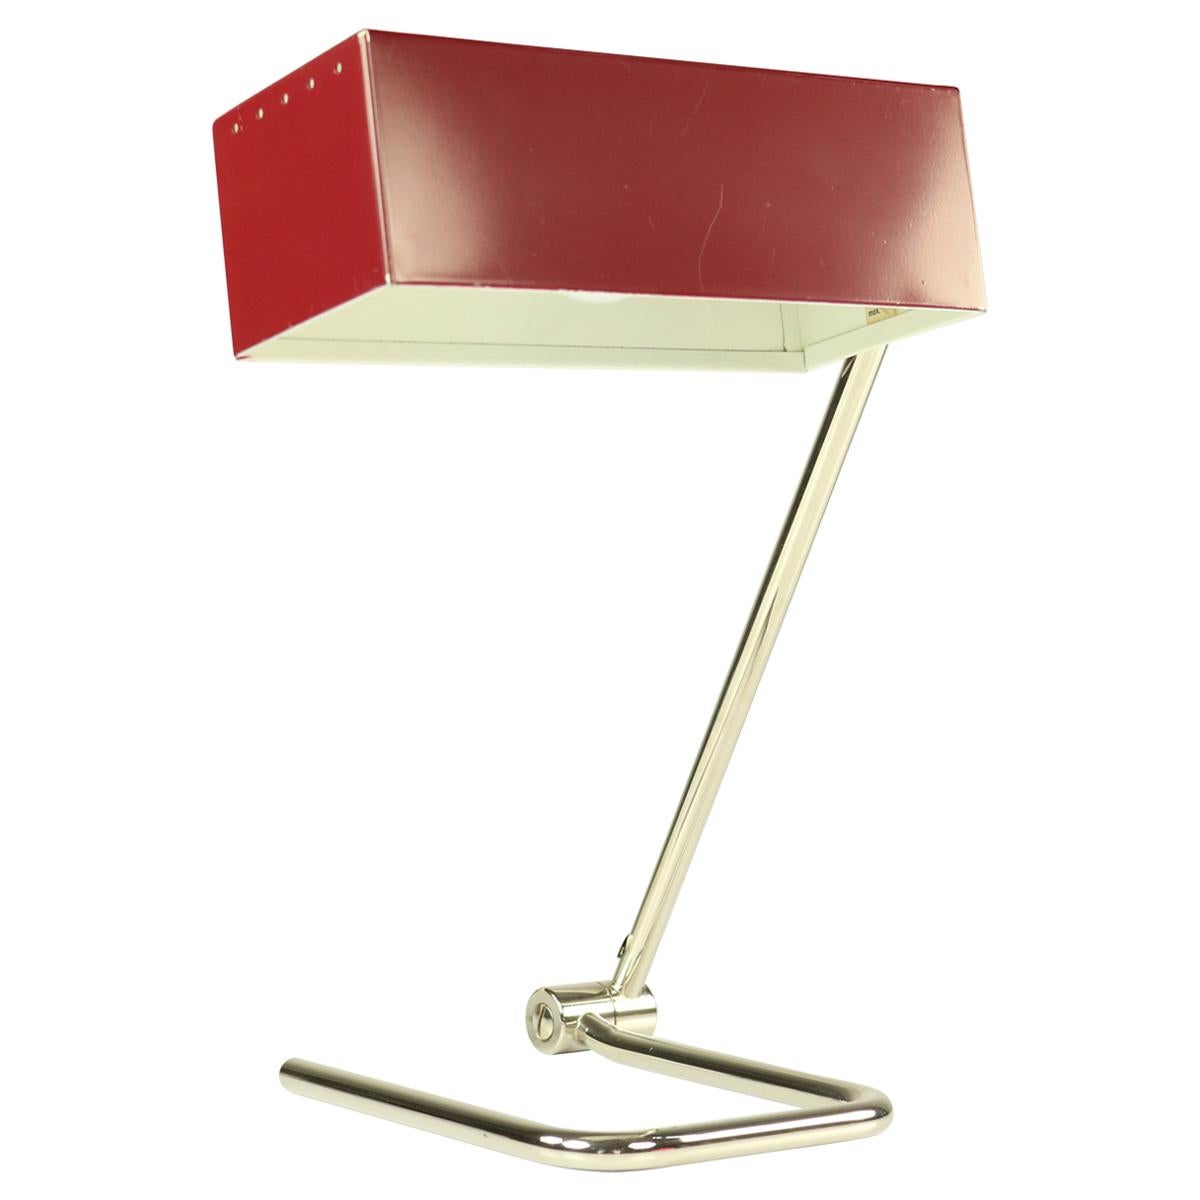 Midcentury Table Lamp by Hala Germany Wine Red and Chrome Vintage, 1950s-1960s For Sale